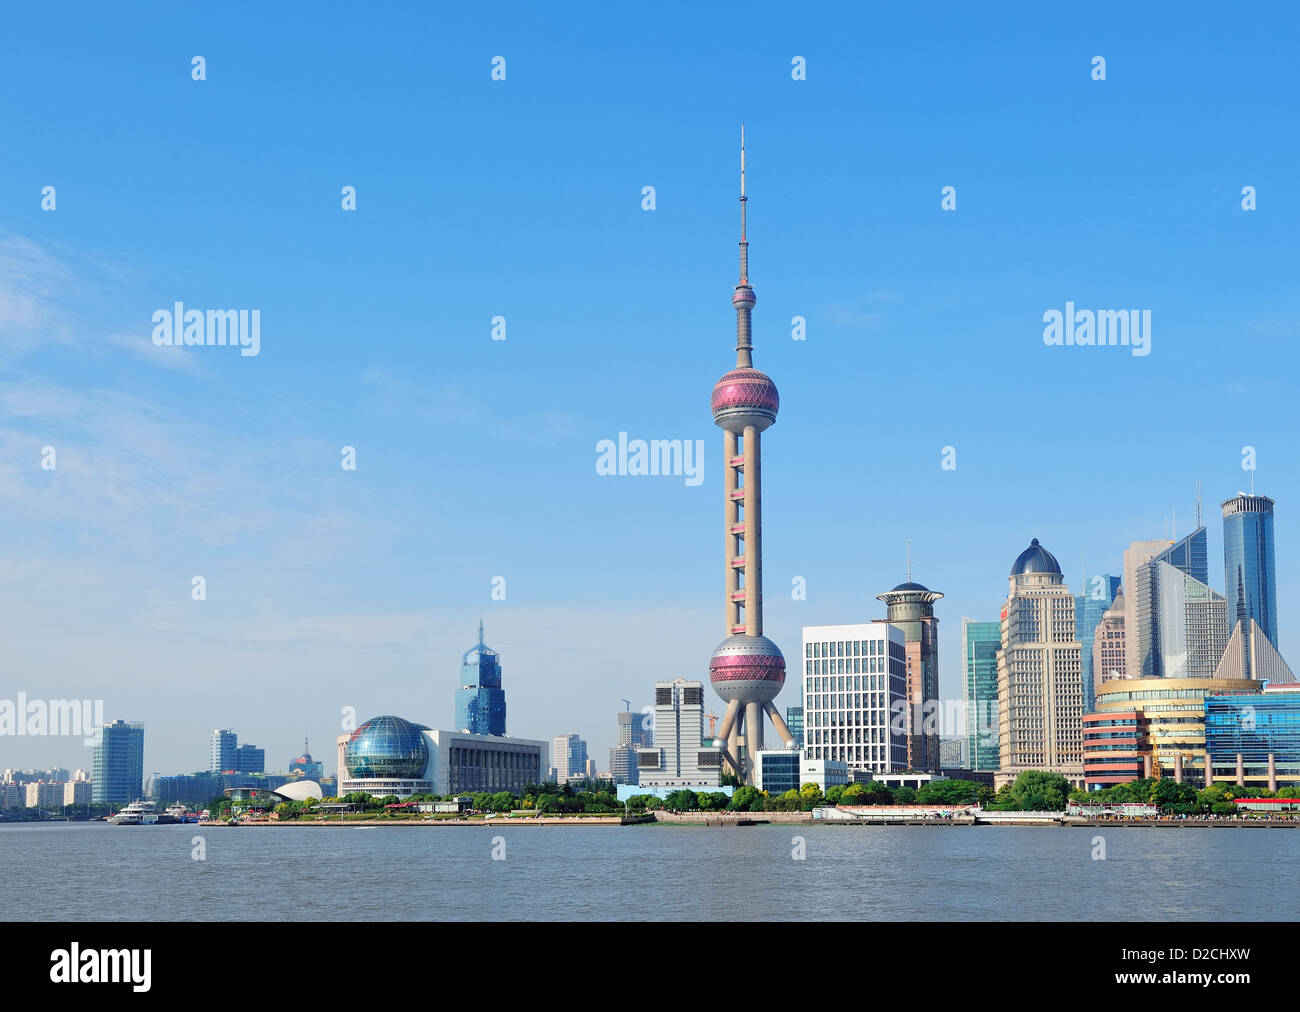 Shanghai skyline with skyscrapers and blue clear sky over Huangpu River. Stock Photo